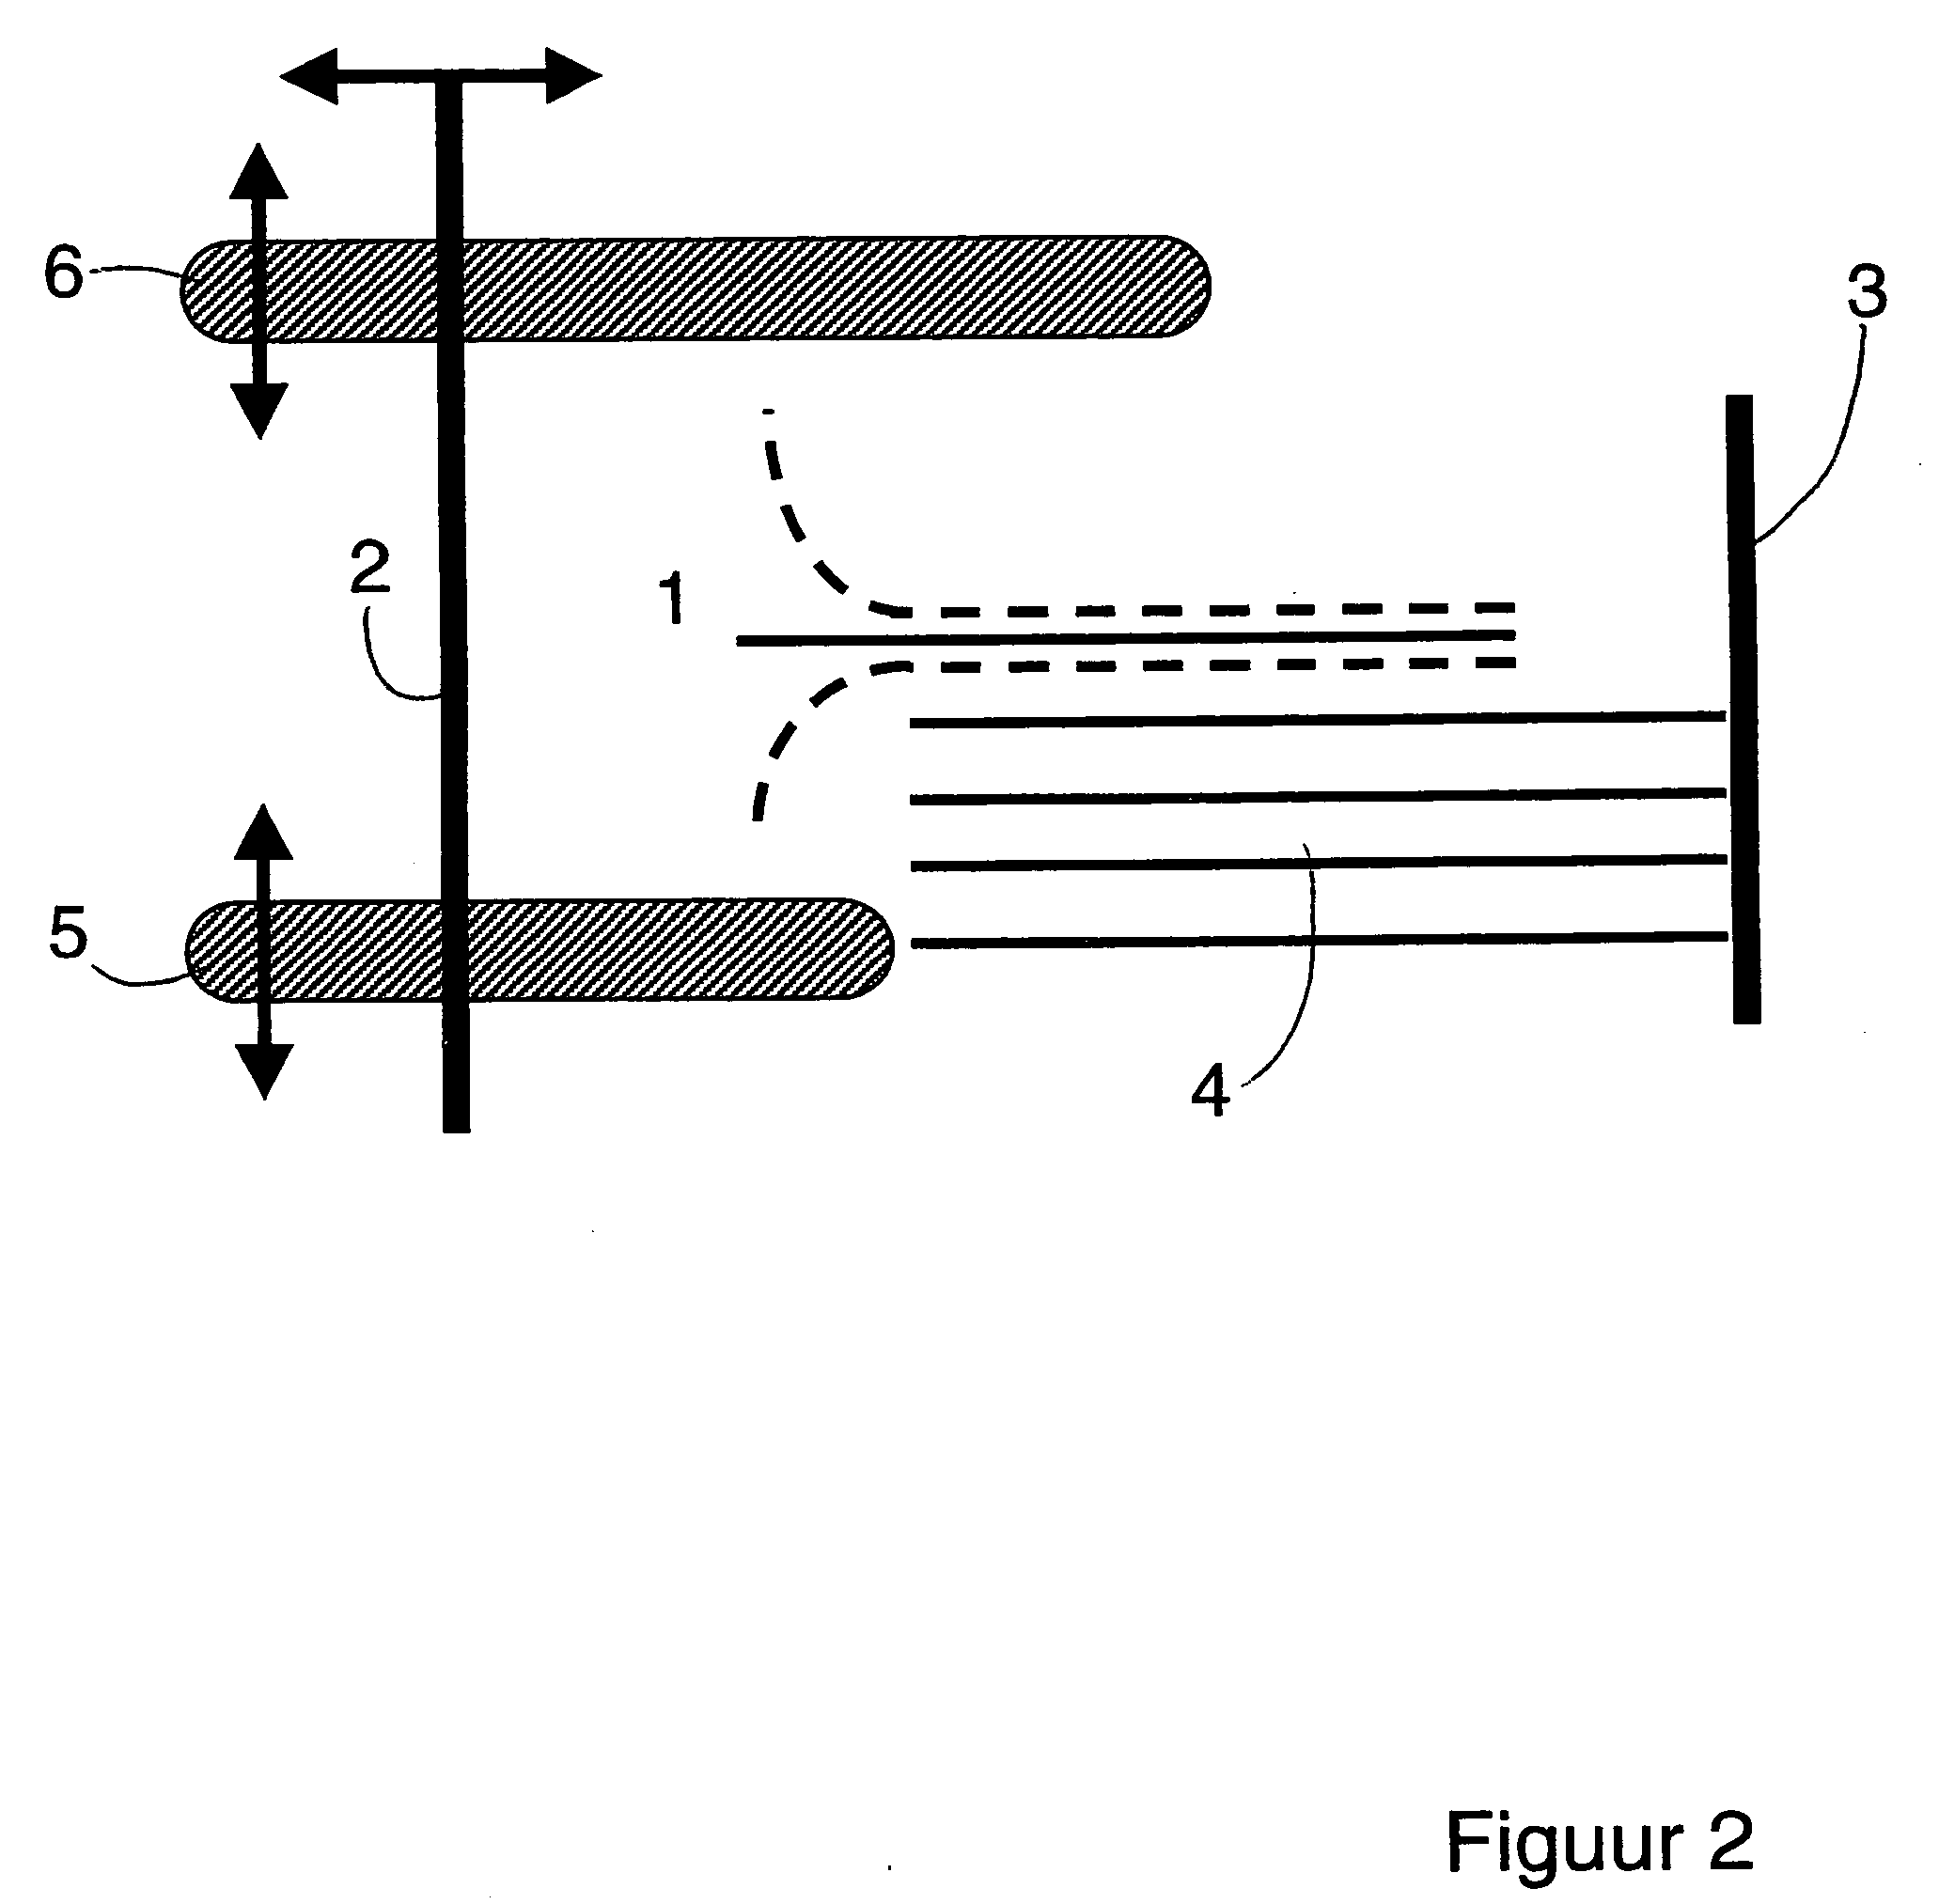 Device and method for forming a stack of sheets on a delivery surface